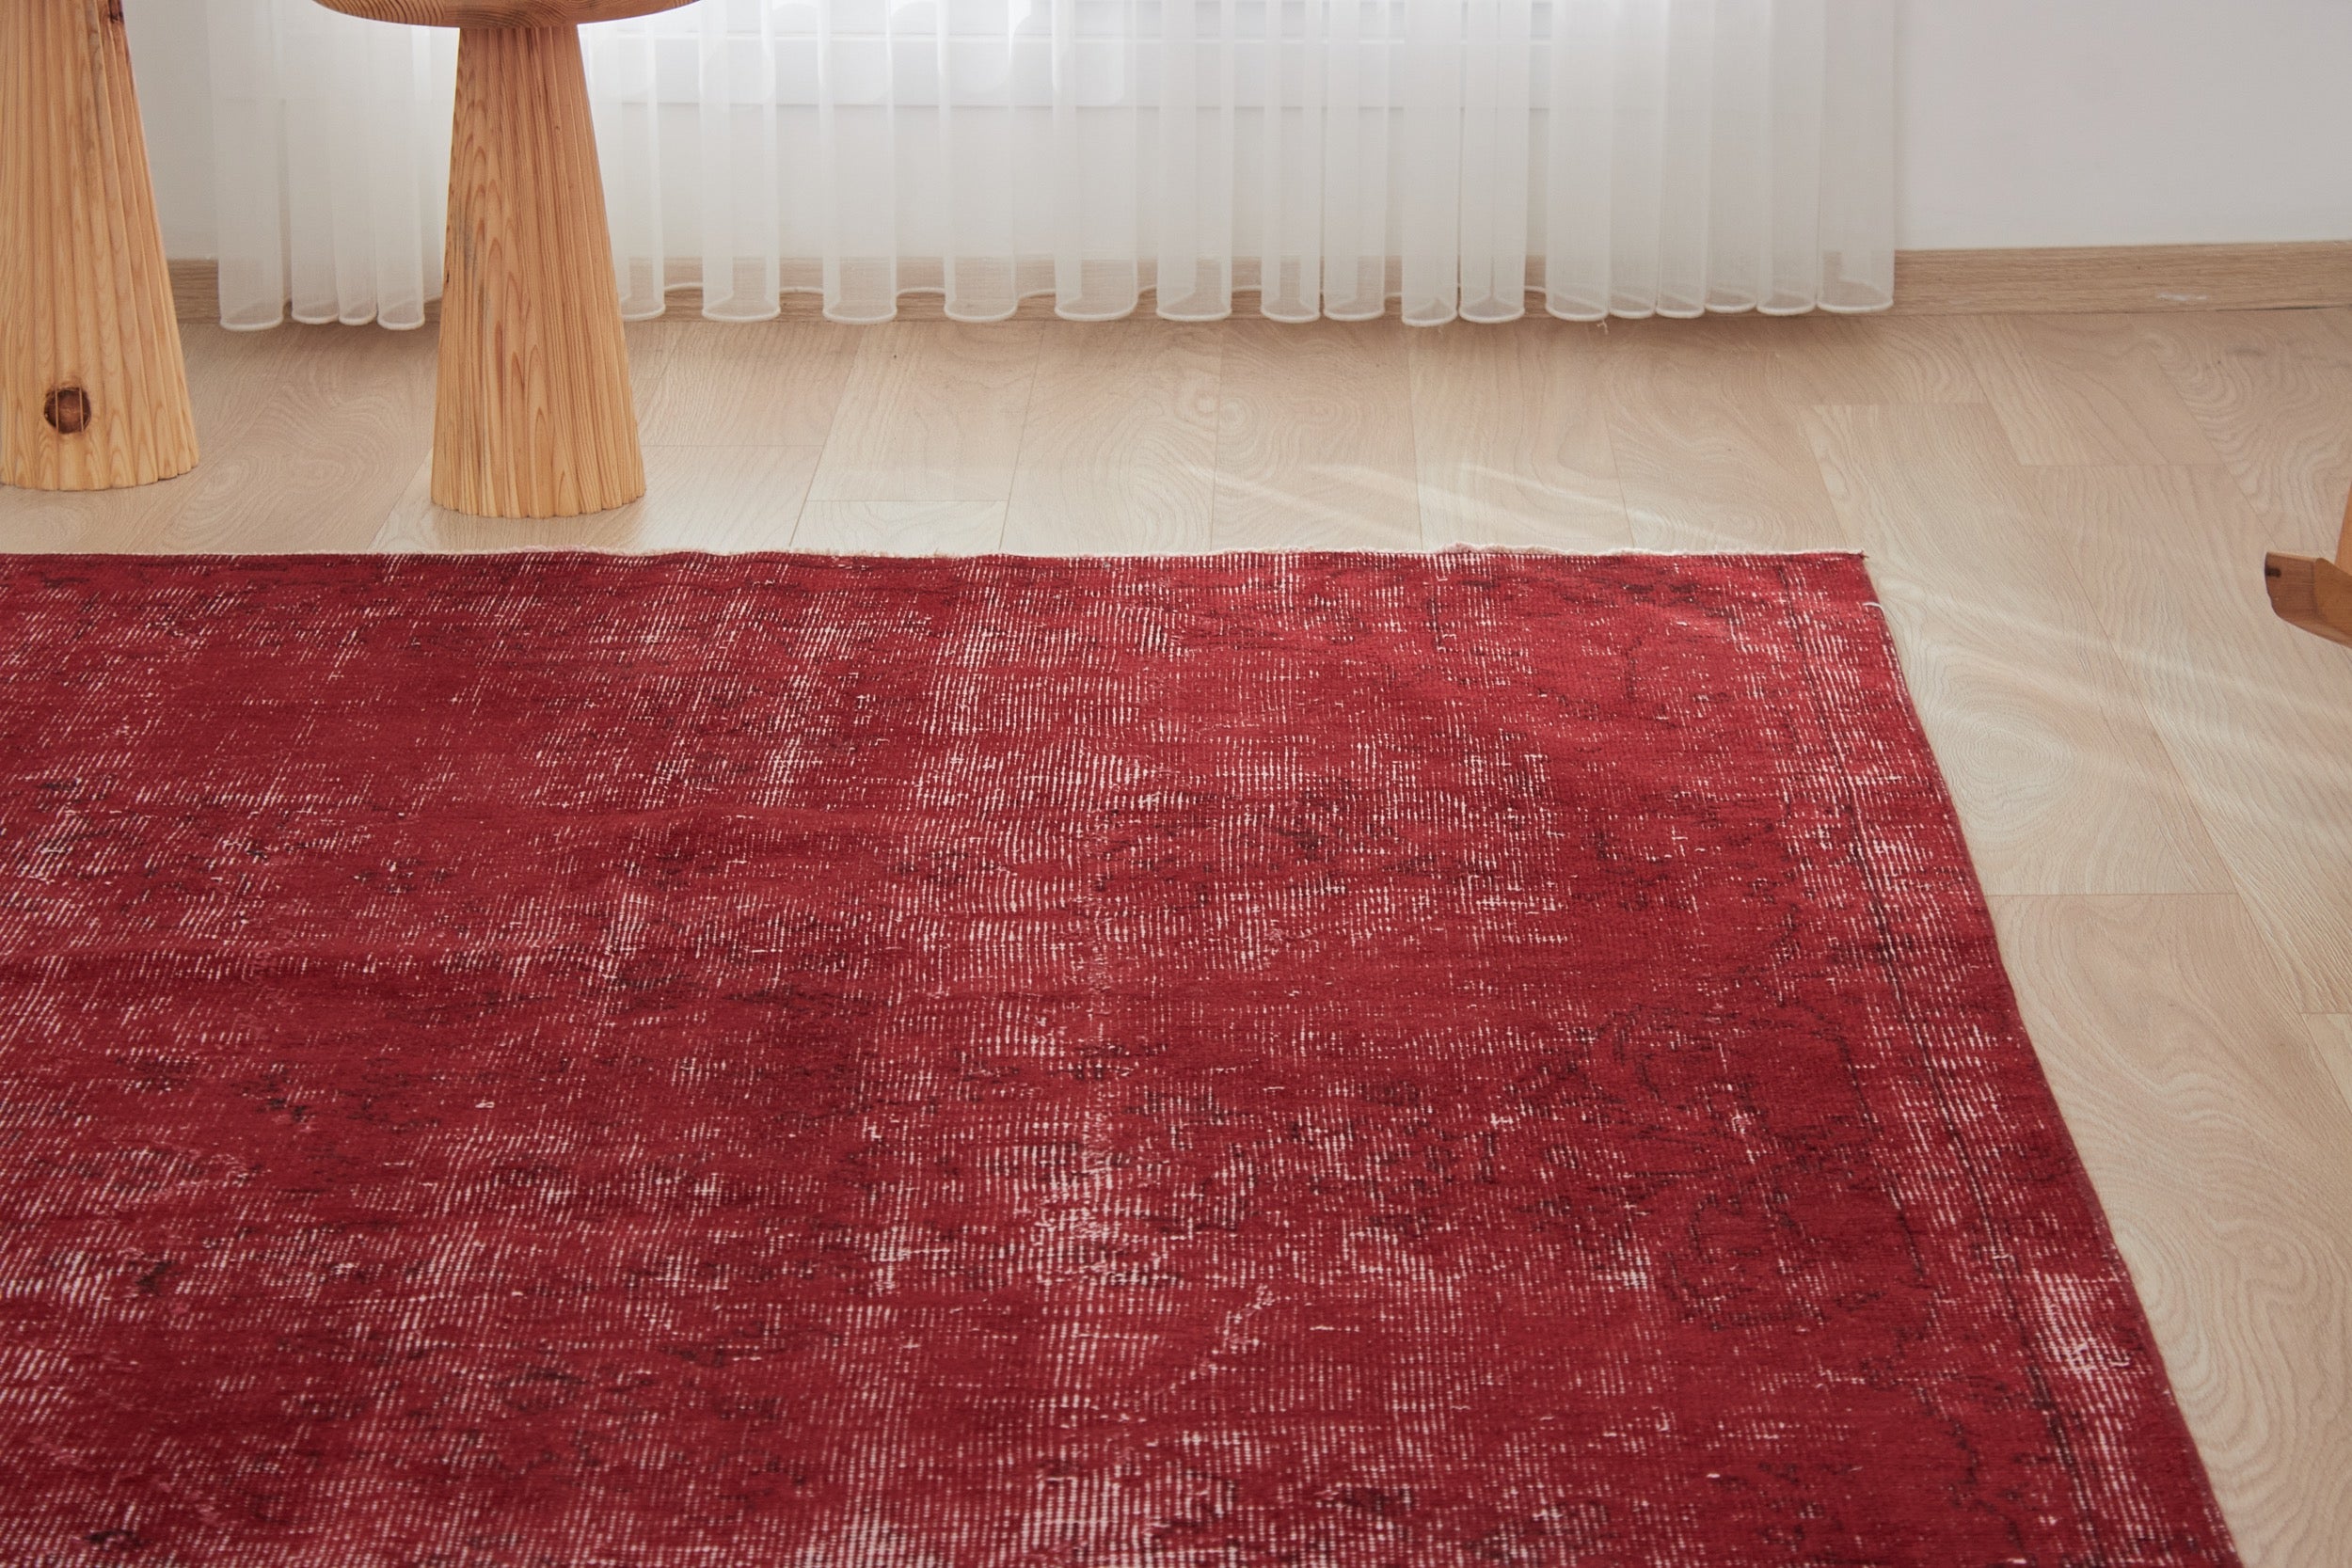 Gretchen | Artisan Crafted Wool and Cotton Rug | Kuden Rugs